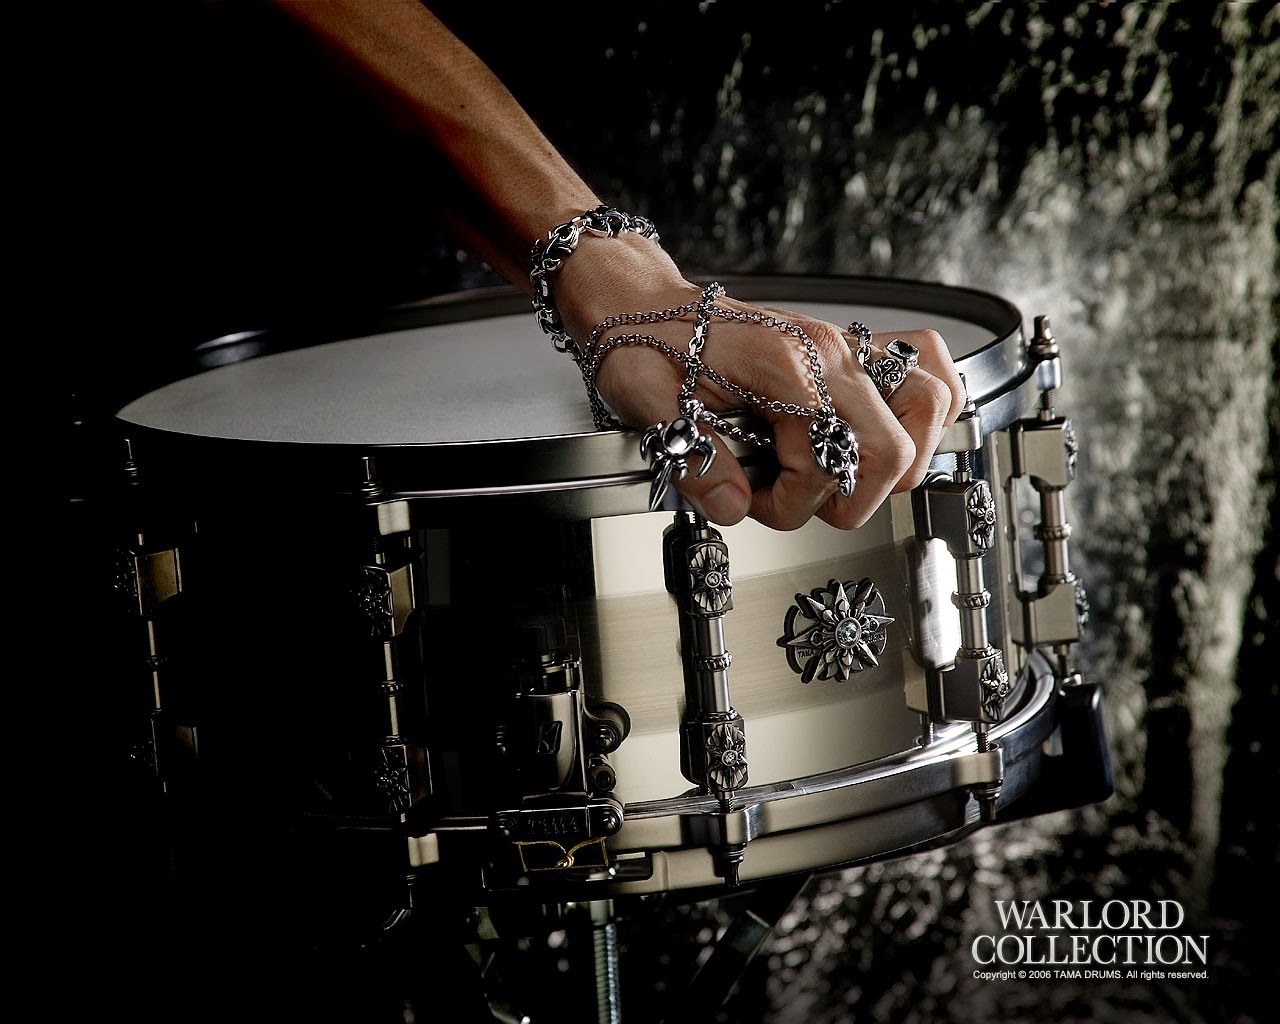 Drums Image HD Photography Widescreen Background